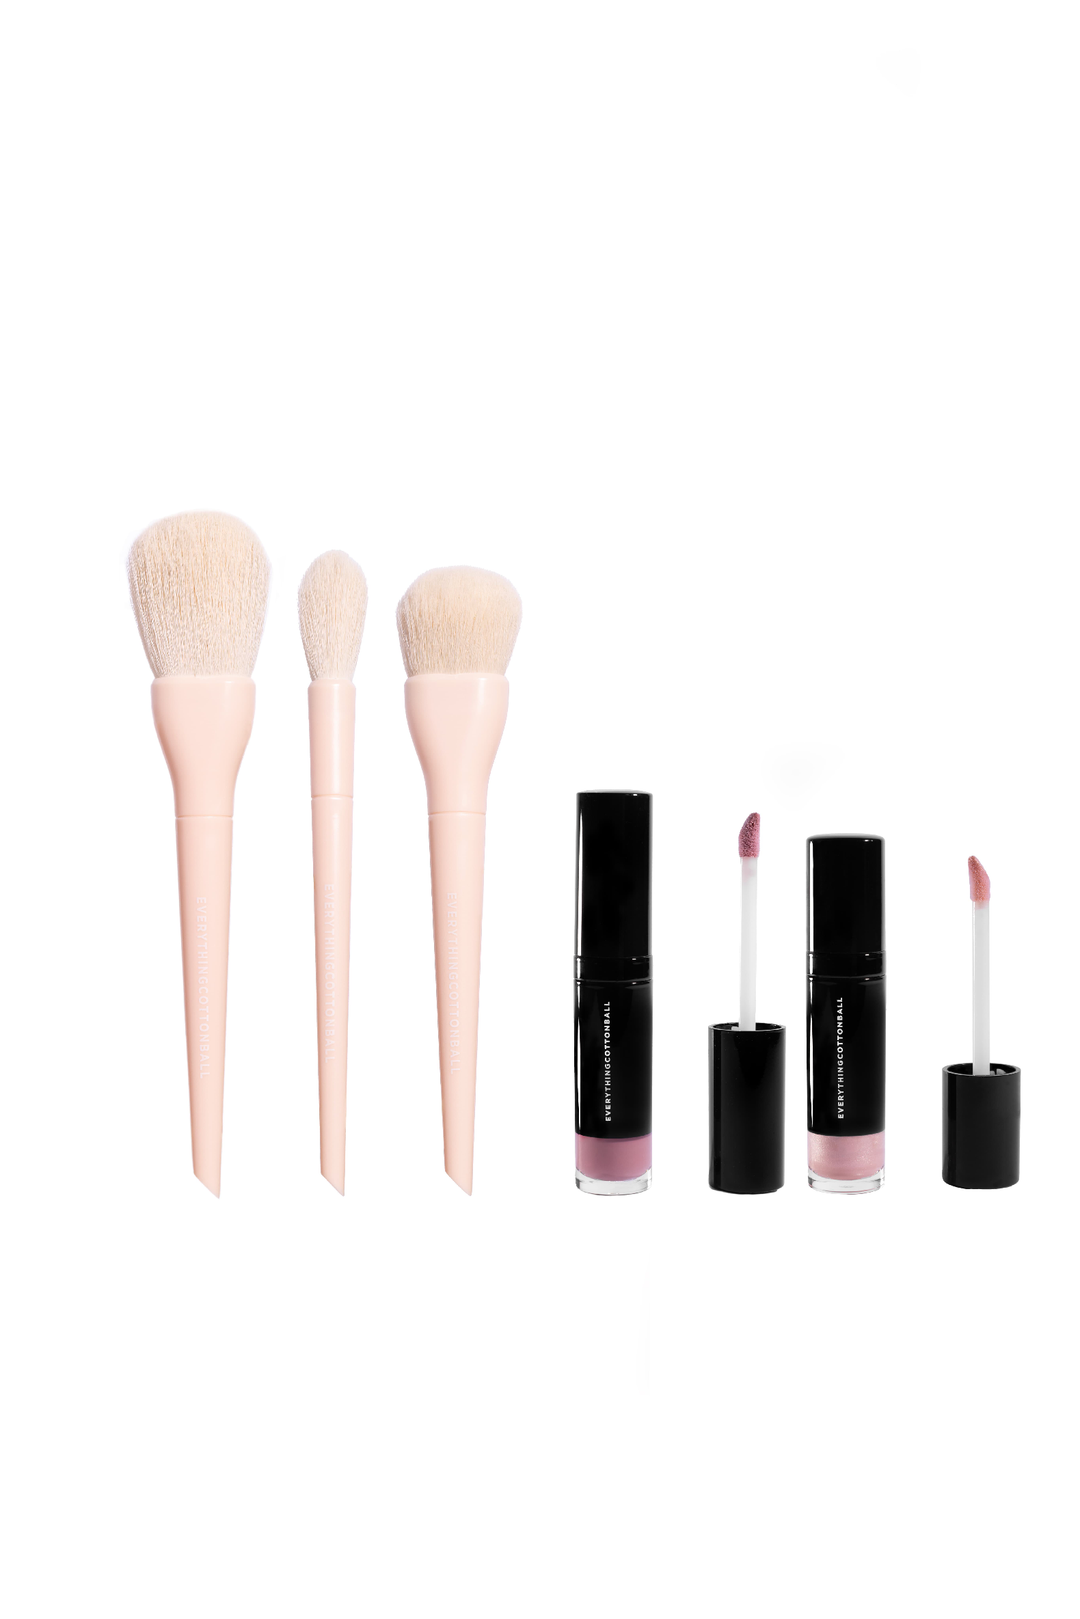 Soft pink ECB Makeup Brushes and Lip Shine Duo in black packaging.  Product shot on white background.